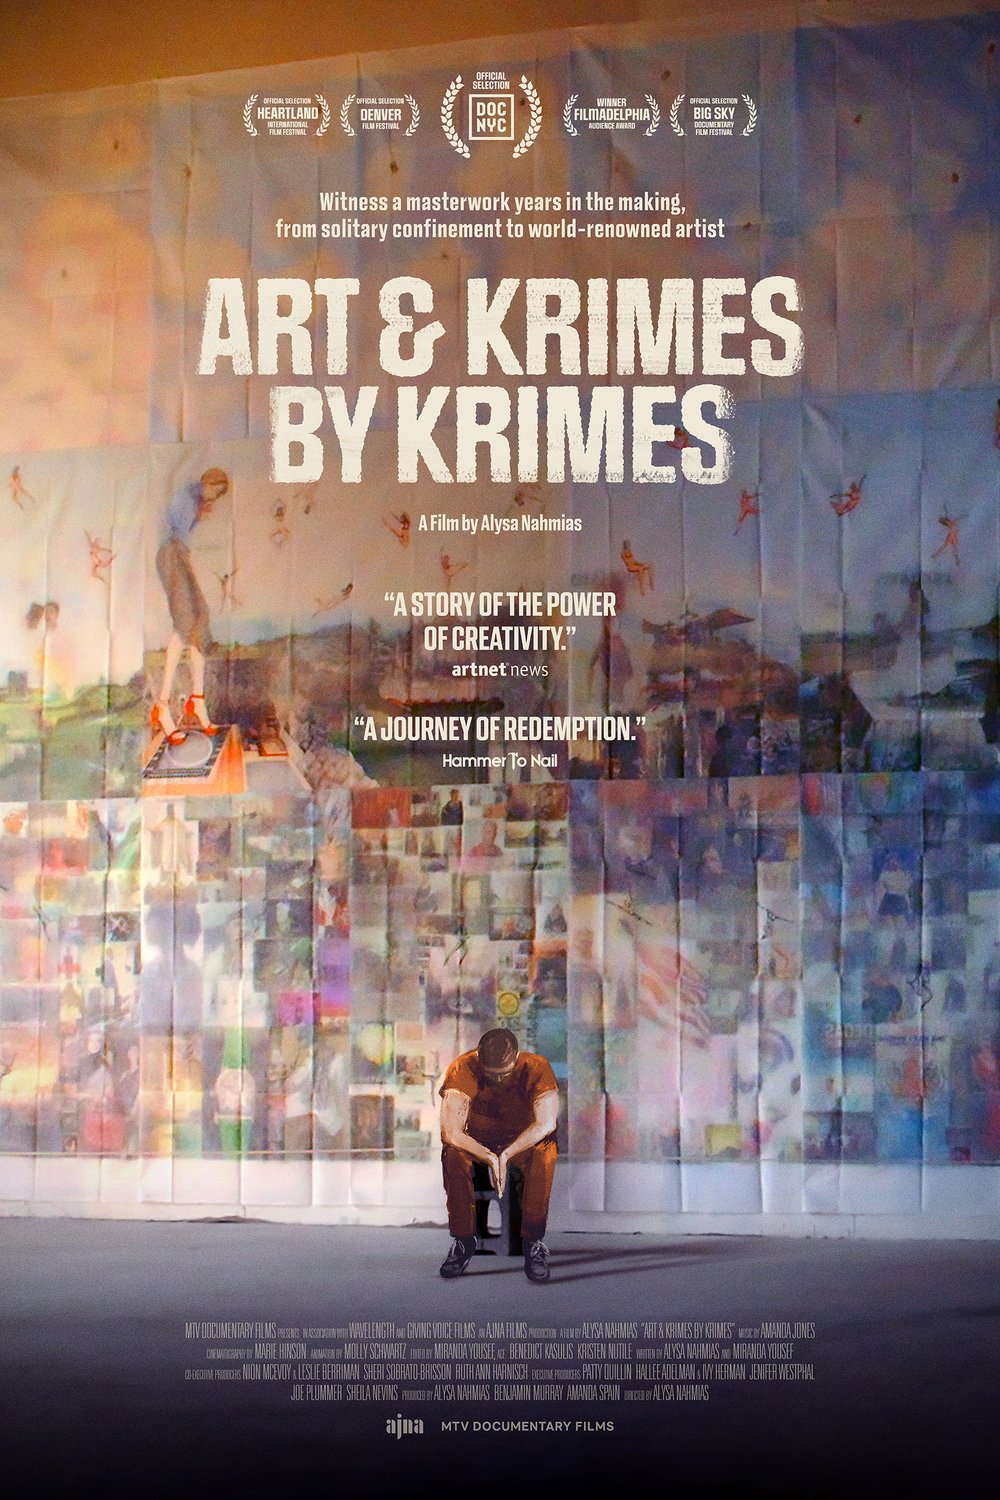 Poster of the movie Art & Krimes by Krimes